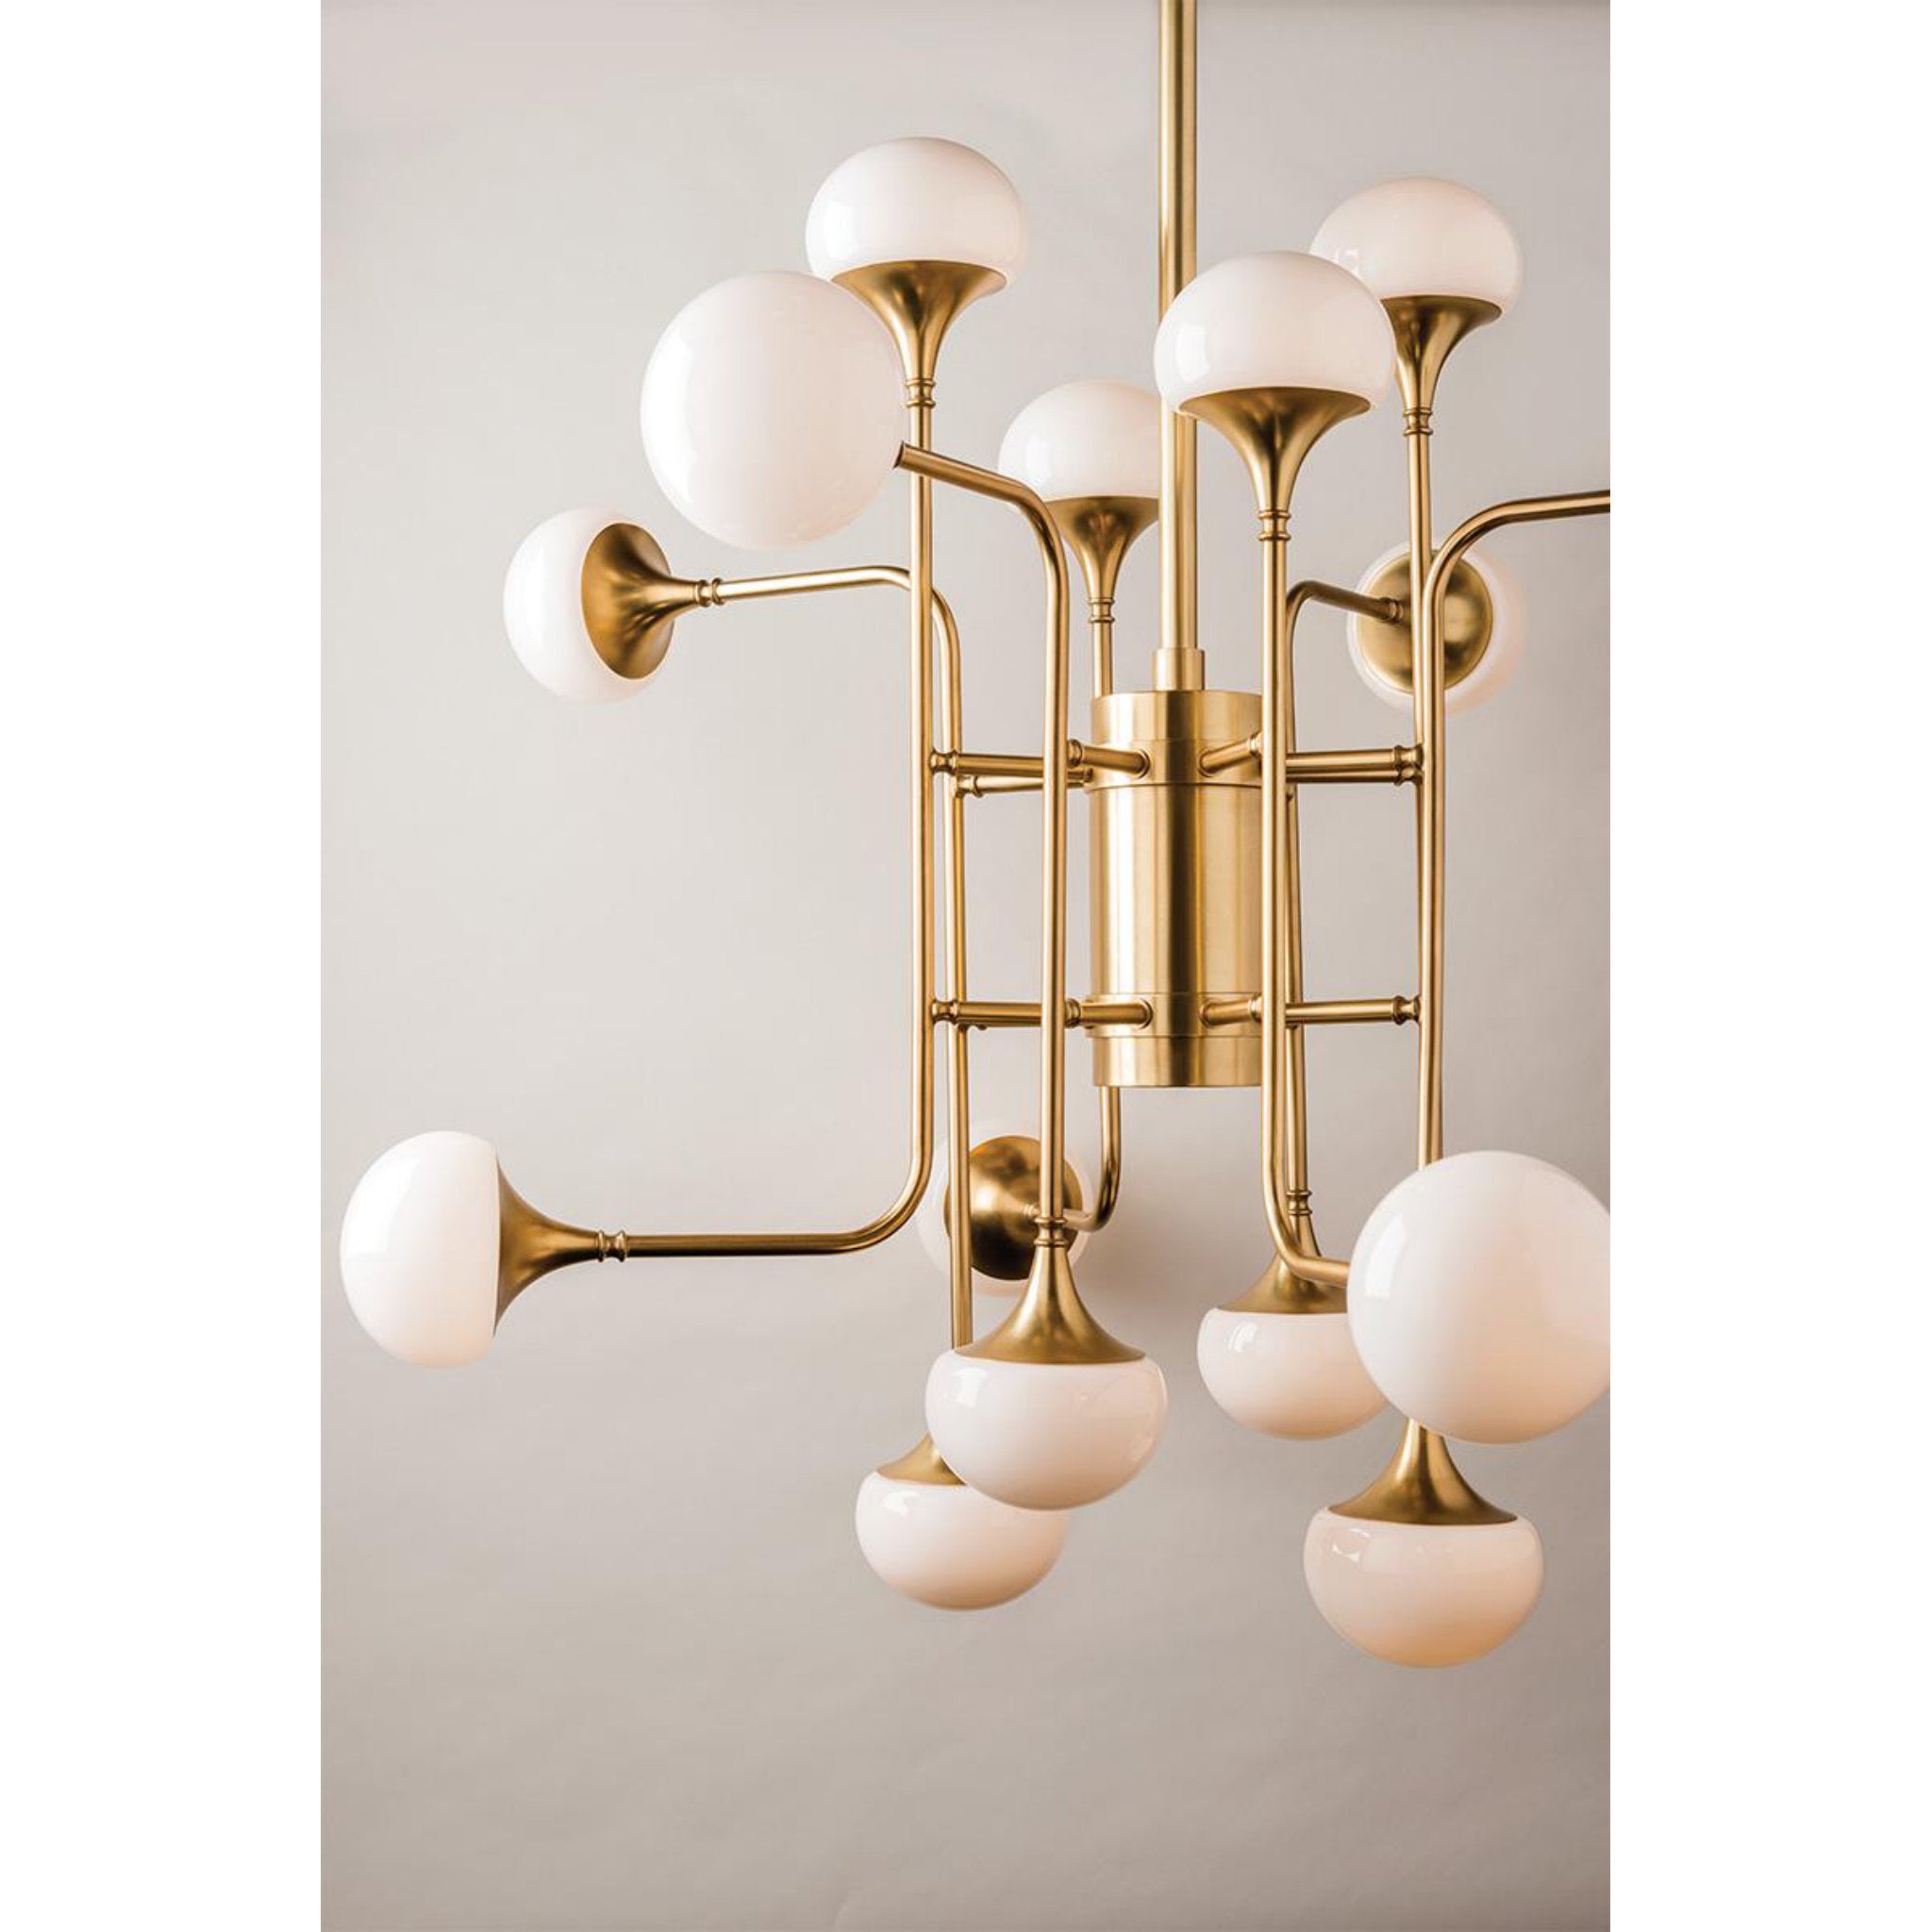 Fleming 3 Light Bath and Vanity in Aged Brass